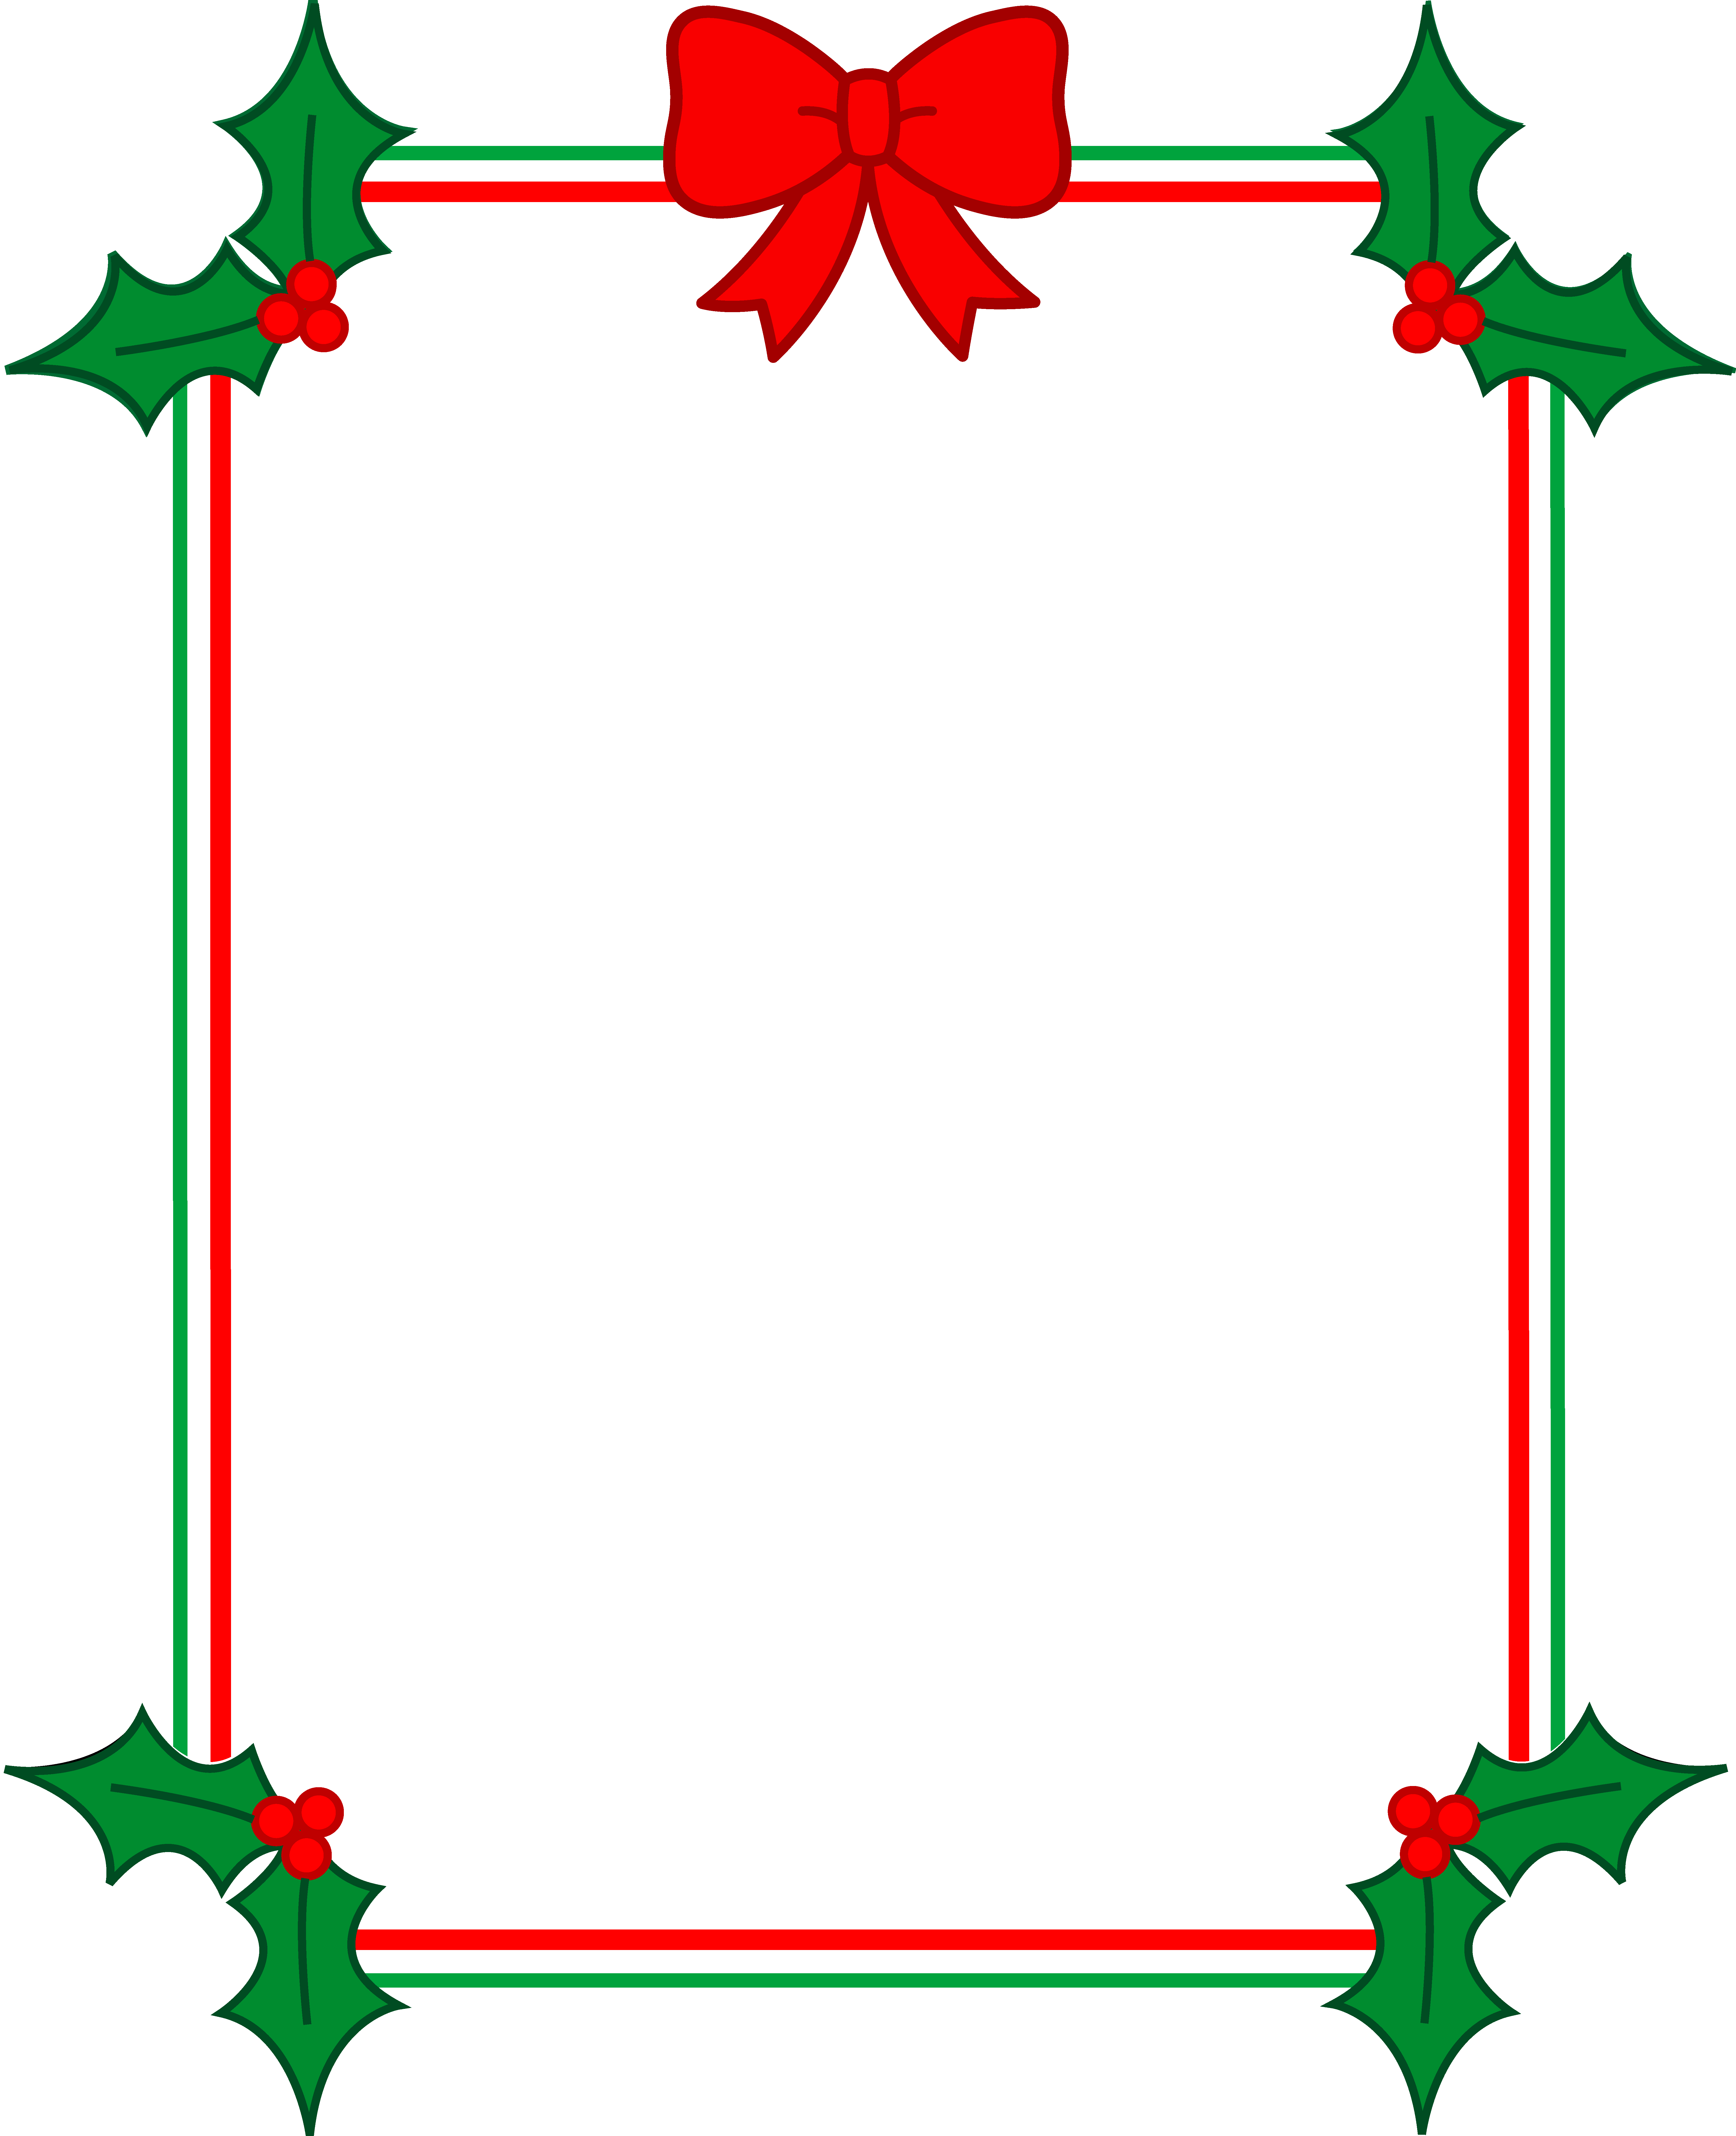 Clipart frames holiday. Christmas border with holly